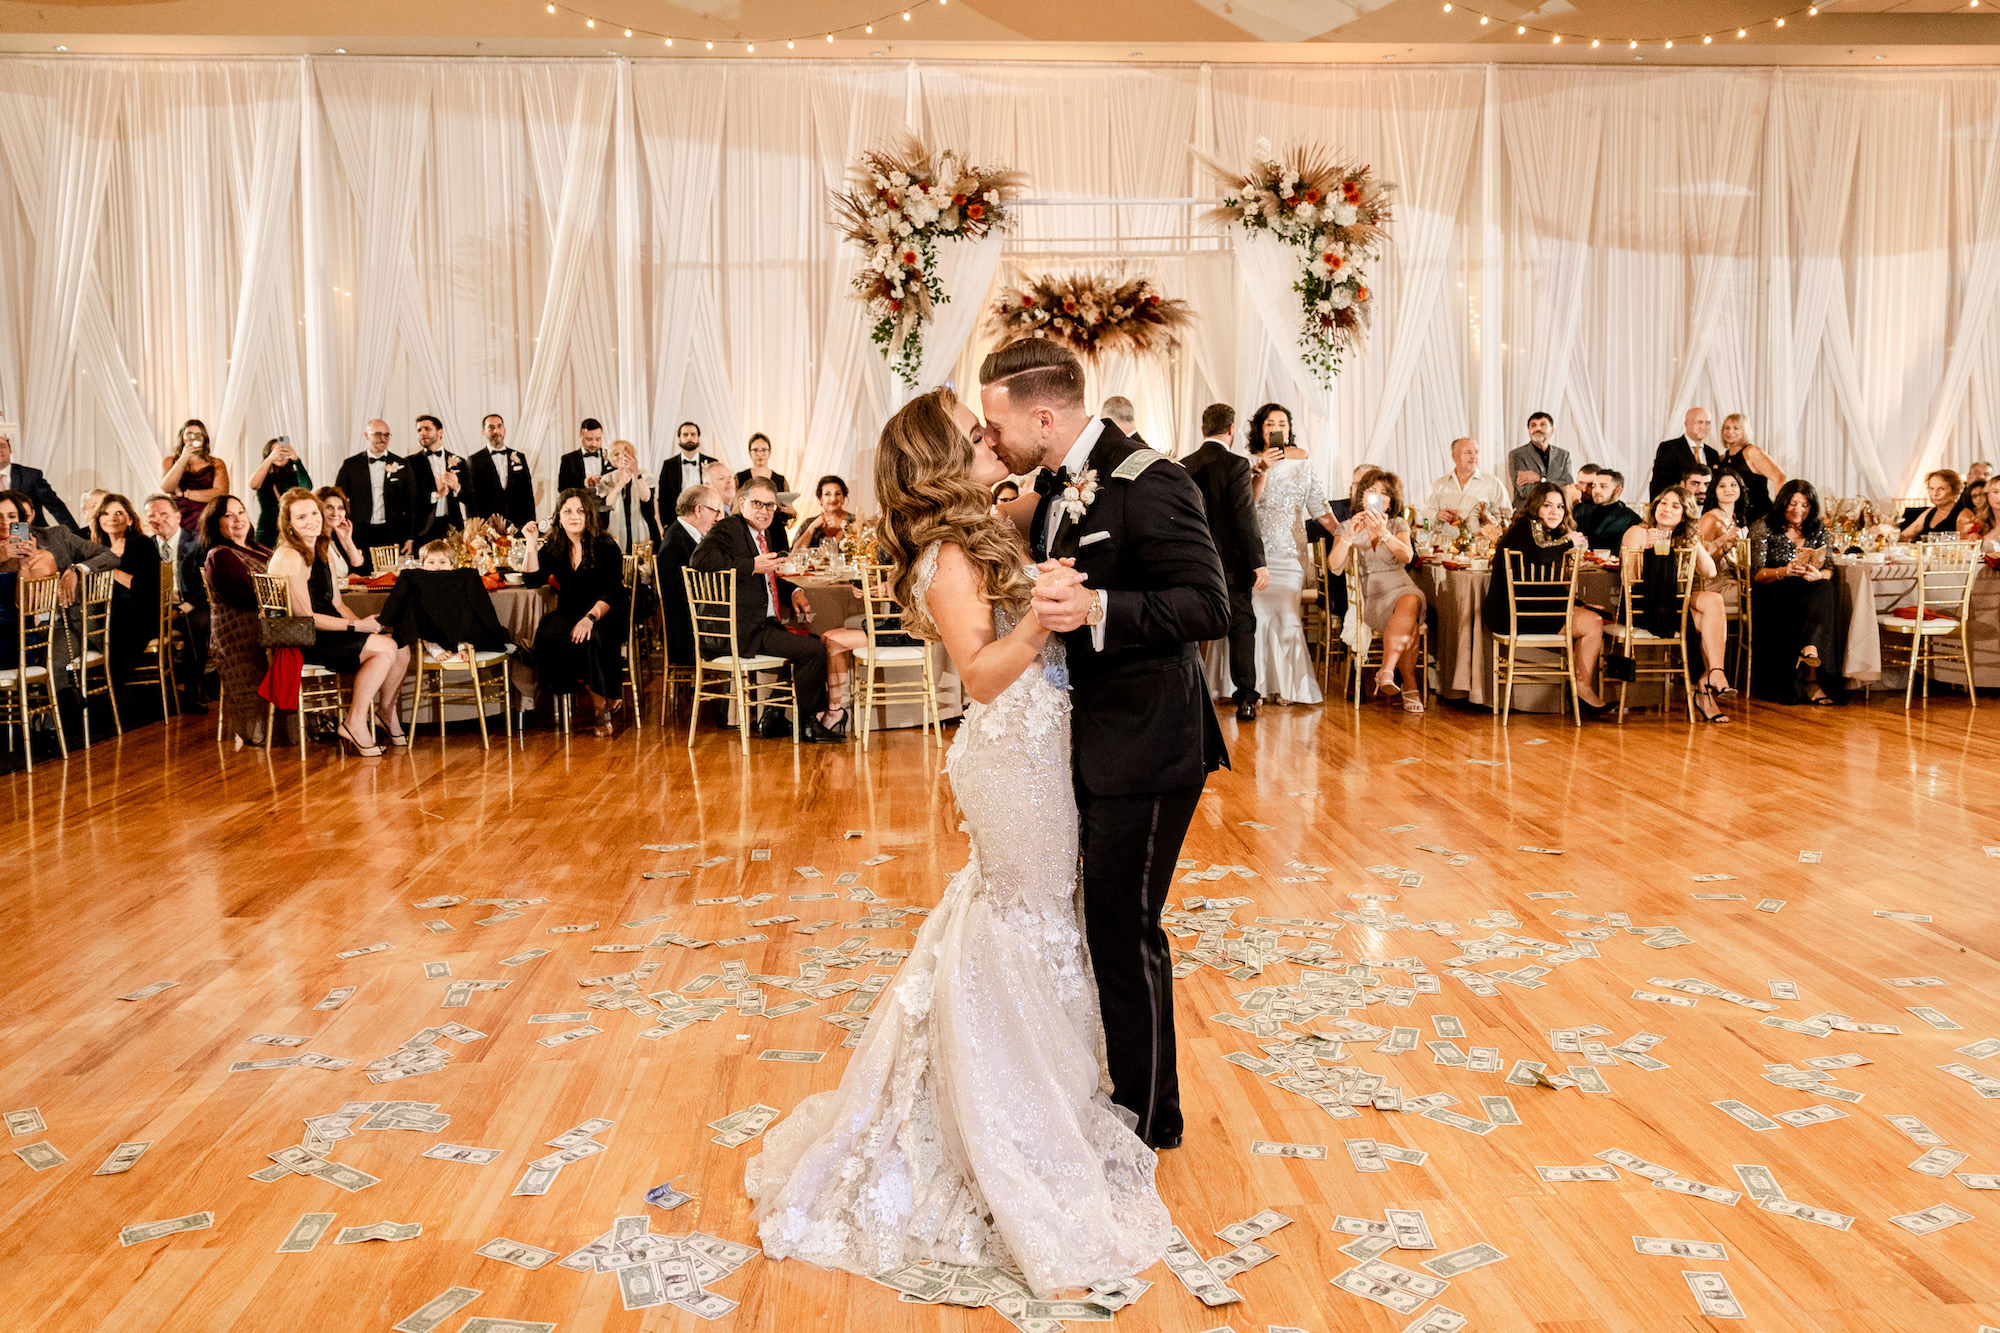 Fall Boho Bride and Groom First Dance with Money All Over Dance Floor